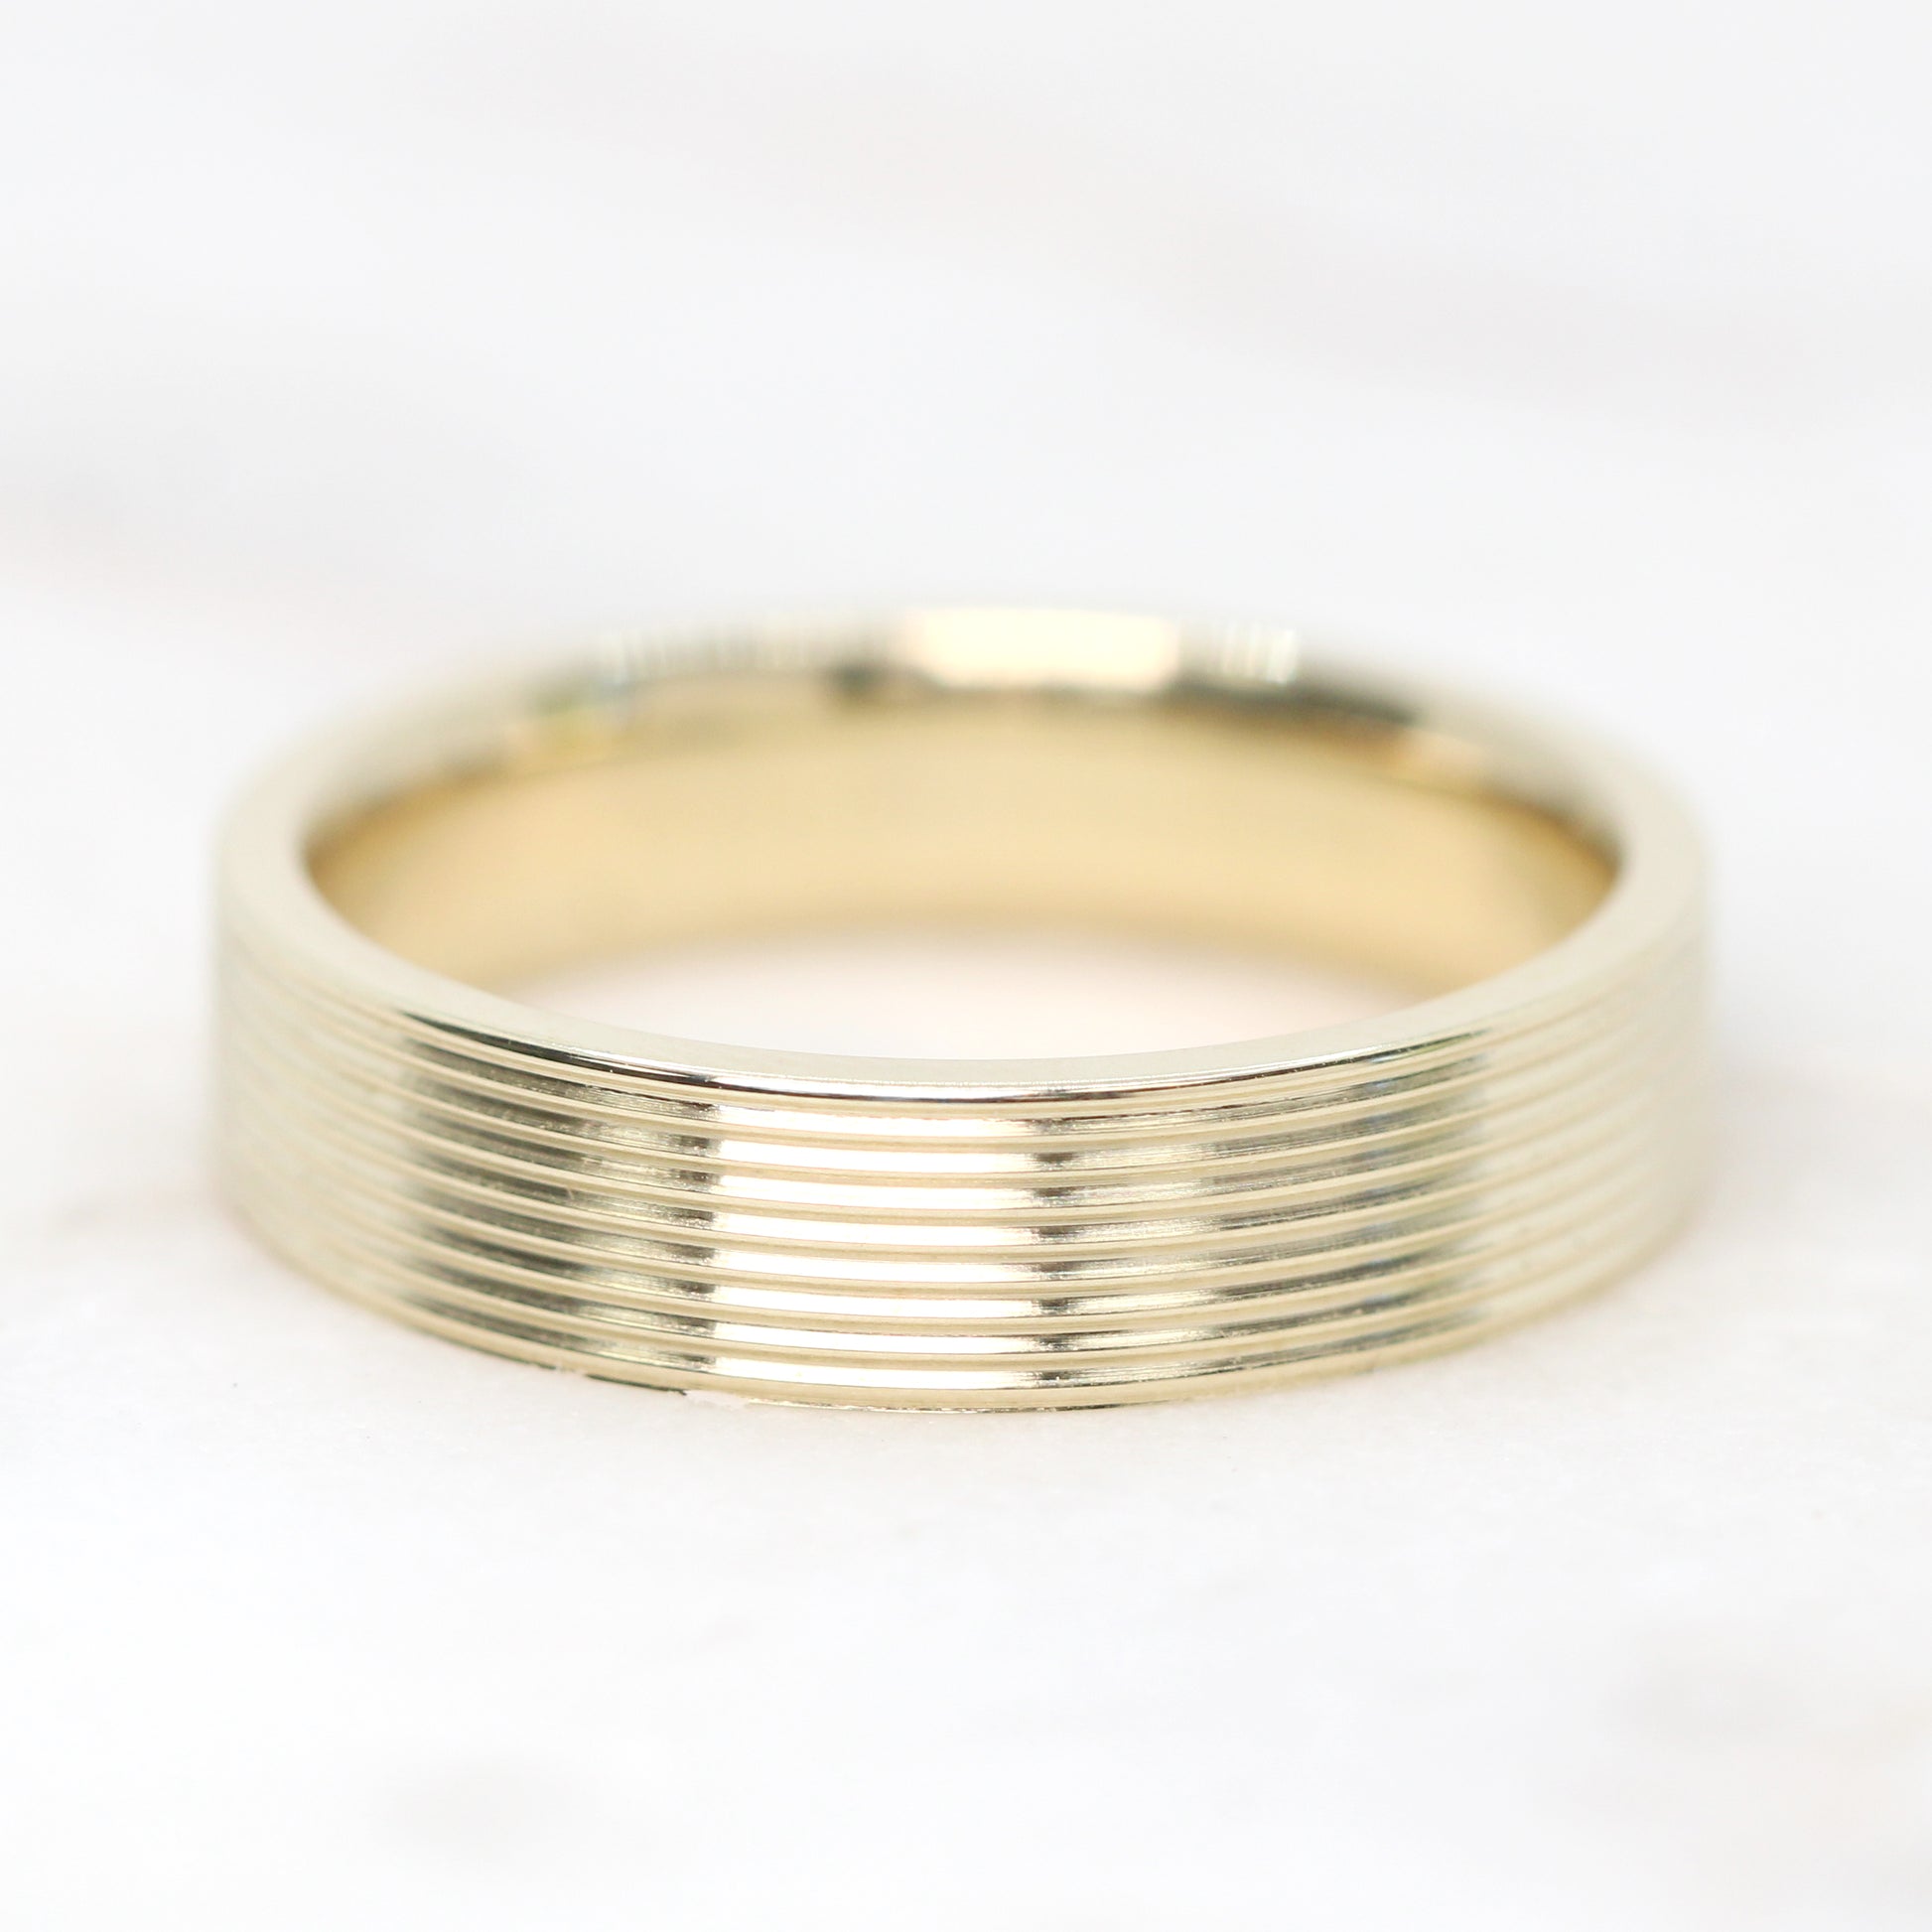 Samantha -  (M) Kody Band - Unisex Wedding Band - Made to Order, Choose Your Gold Tone - Midwinter Co. Alternative Bridal Rings and Modern Fine Jewelry